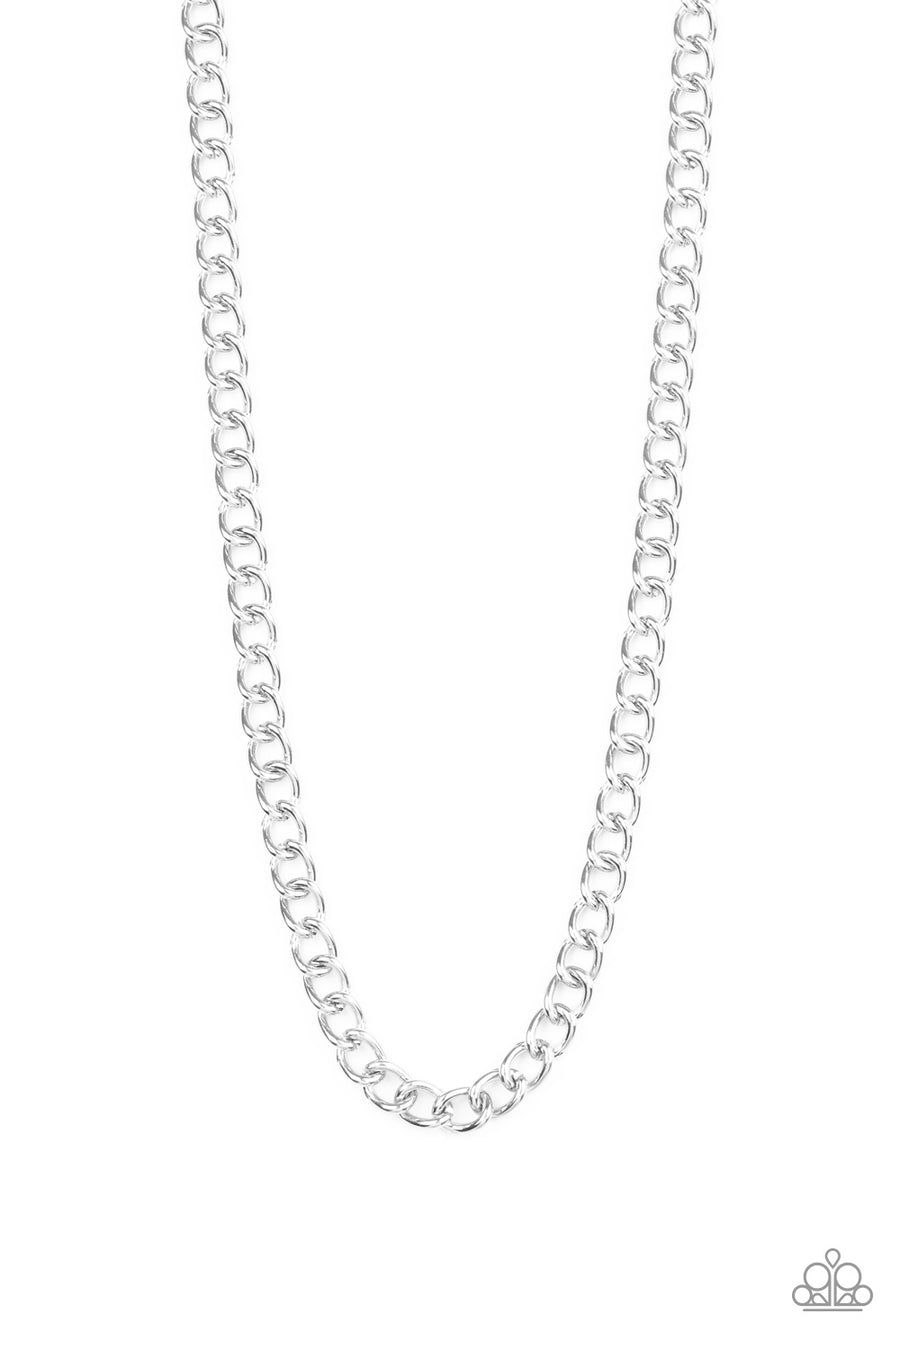 Full Court - Silver Chain Necklace - Paparazzi Accessories